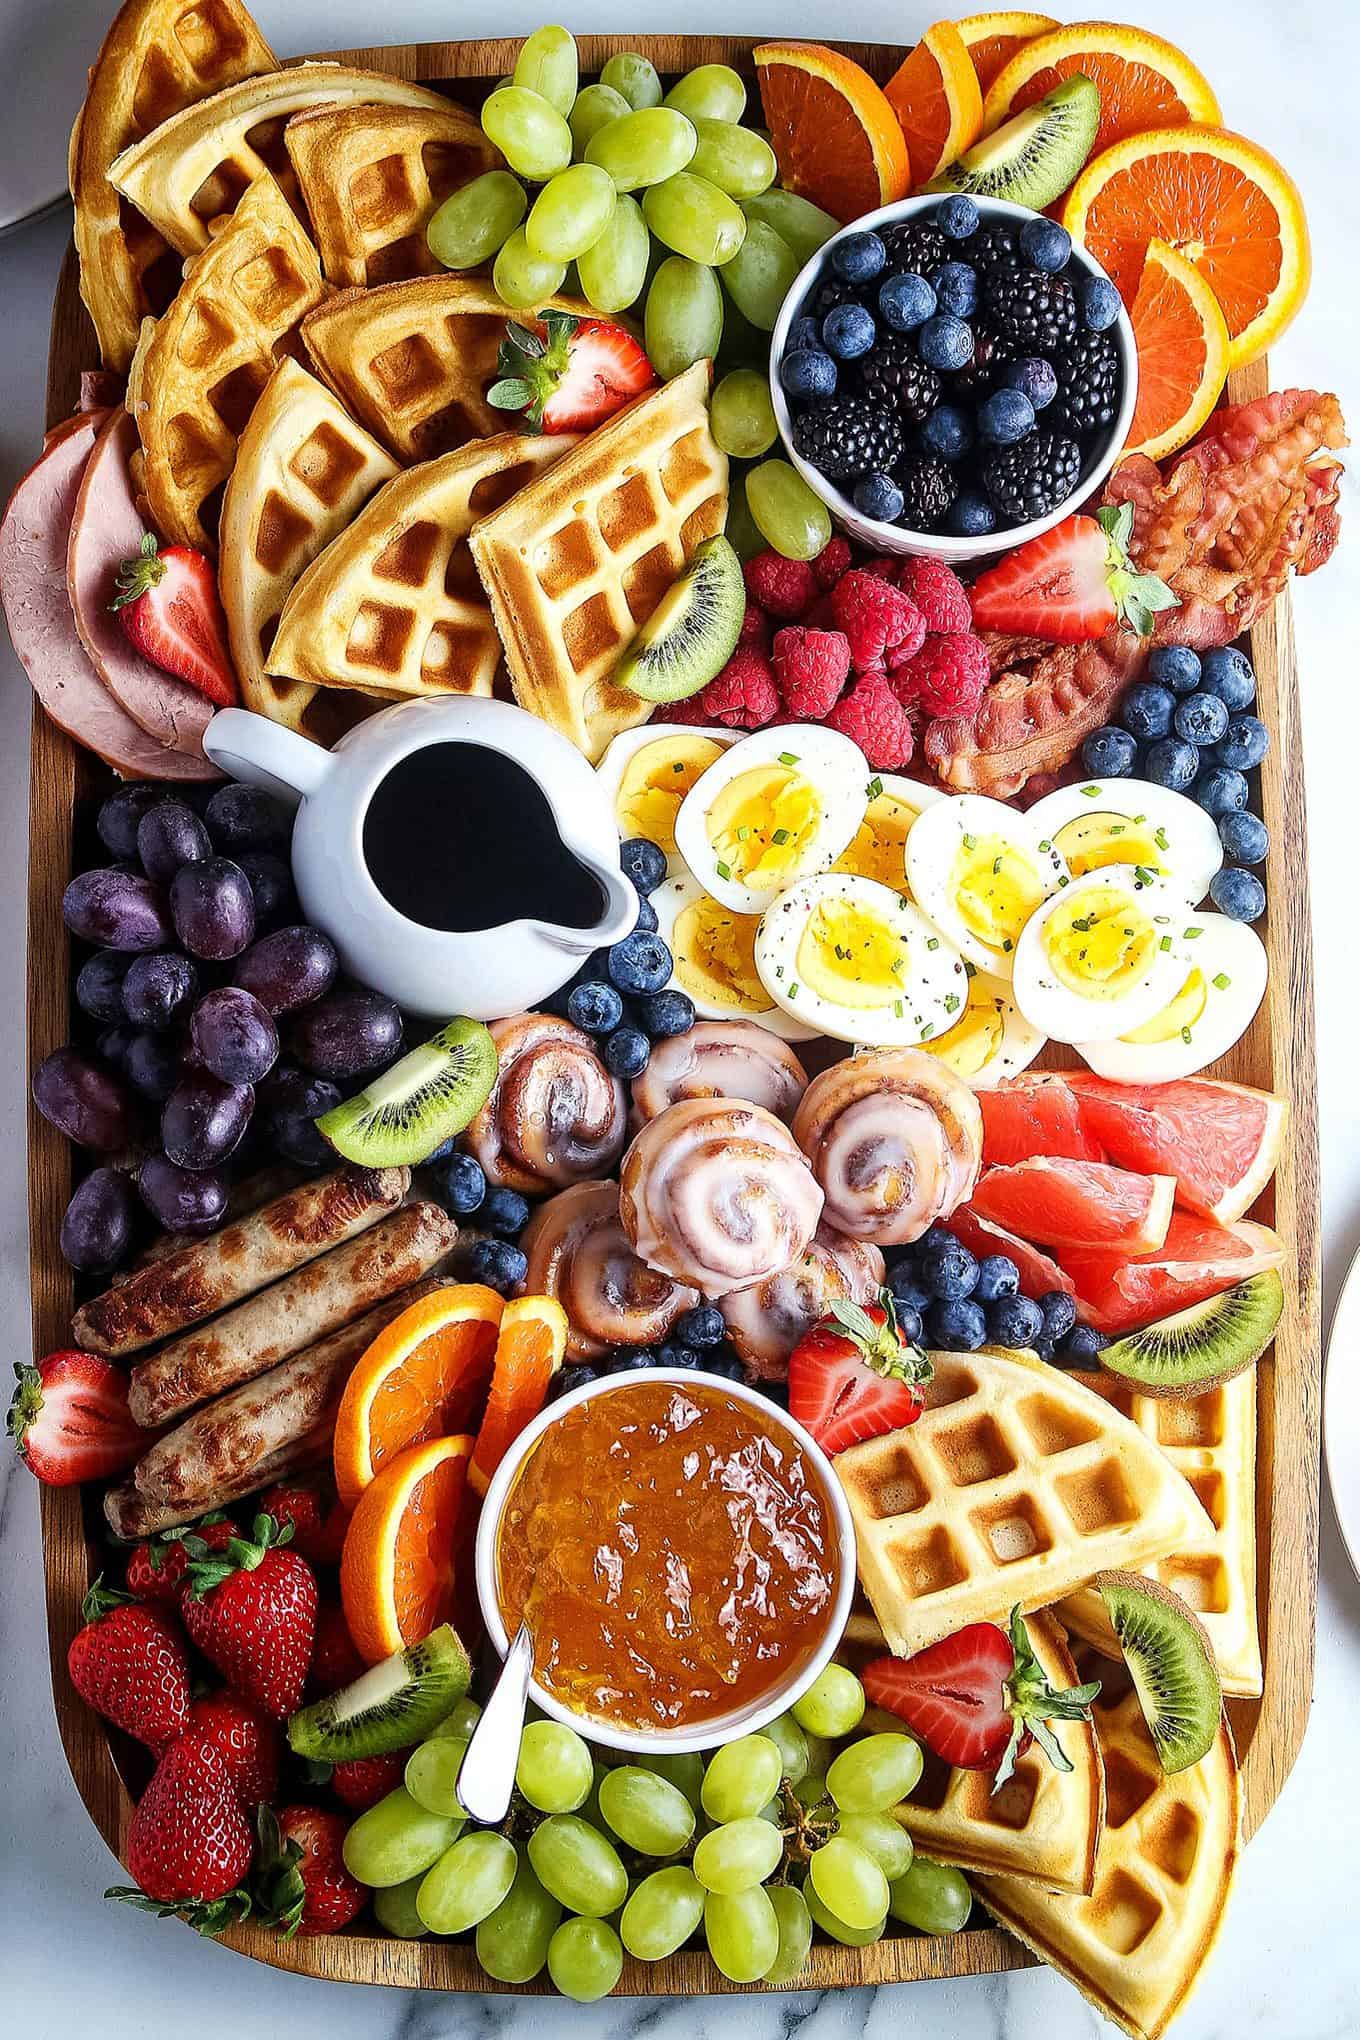 Easy Brunch and Breakfast Charcuterie Board Ideas » The Thirsty Feast ...